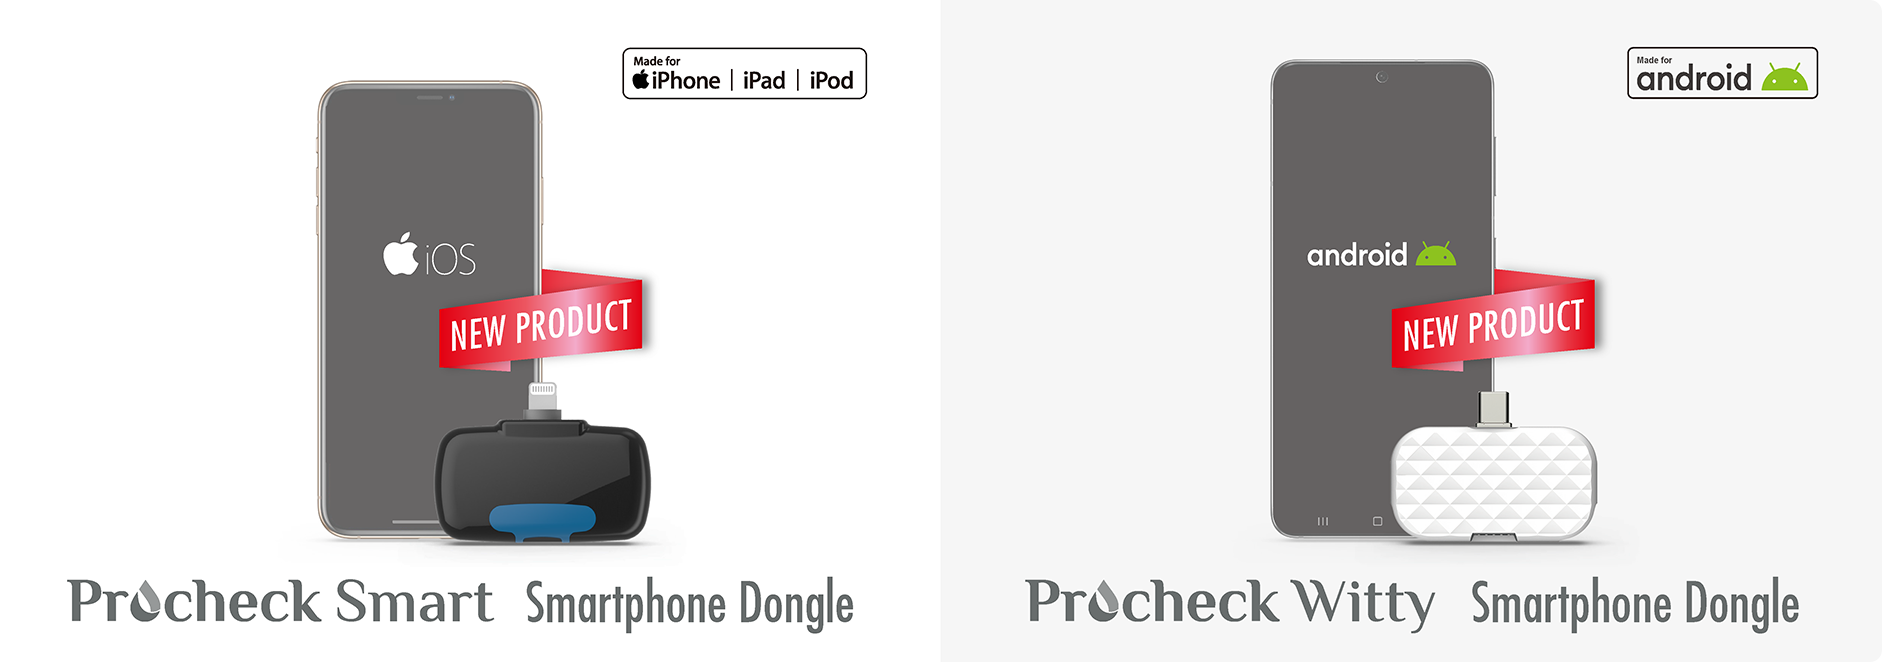 Cholesterol Monitor ProCheck Smart connects directly to your smartphone via the ProCheck app to help you manage your cholesterol levels.